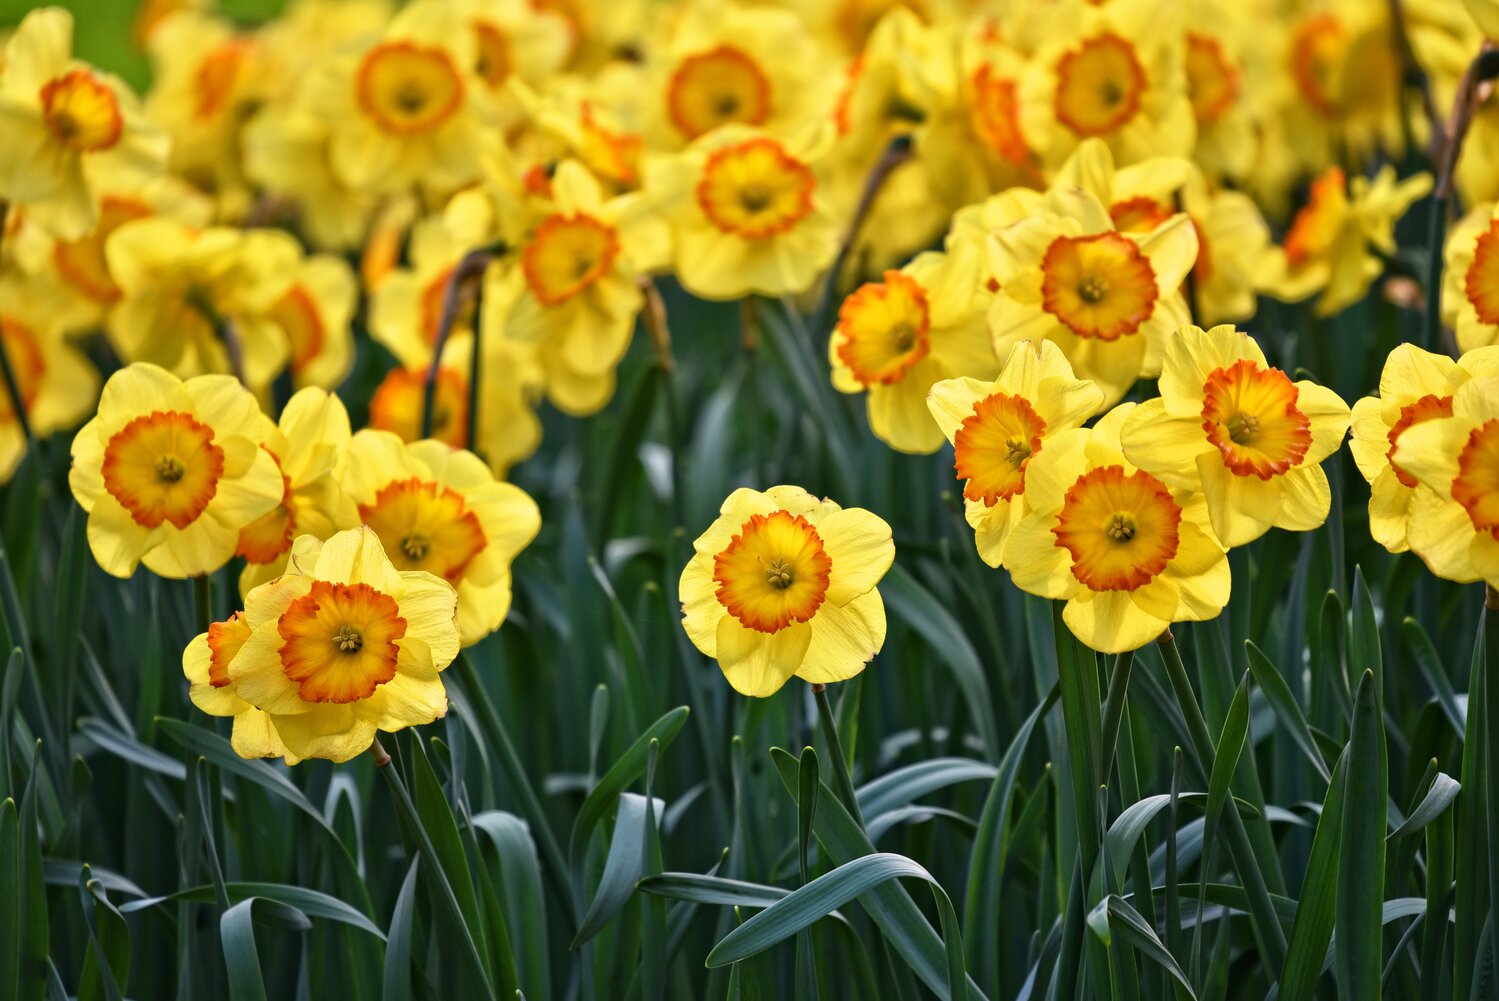 Daffodils are also known to be hearty against the early spring elements.